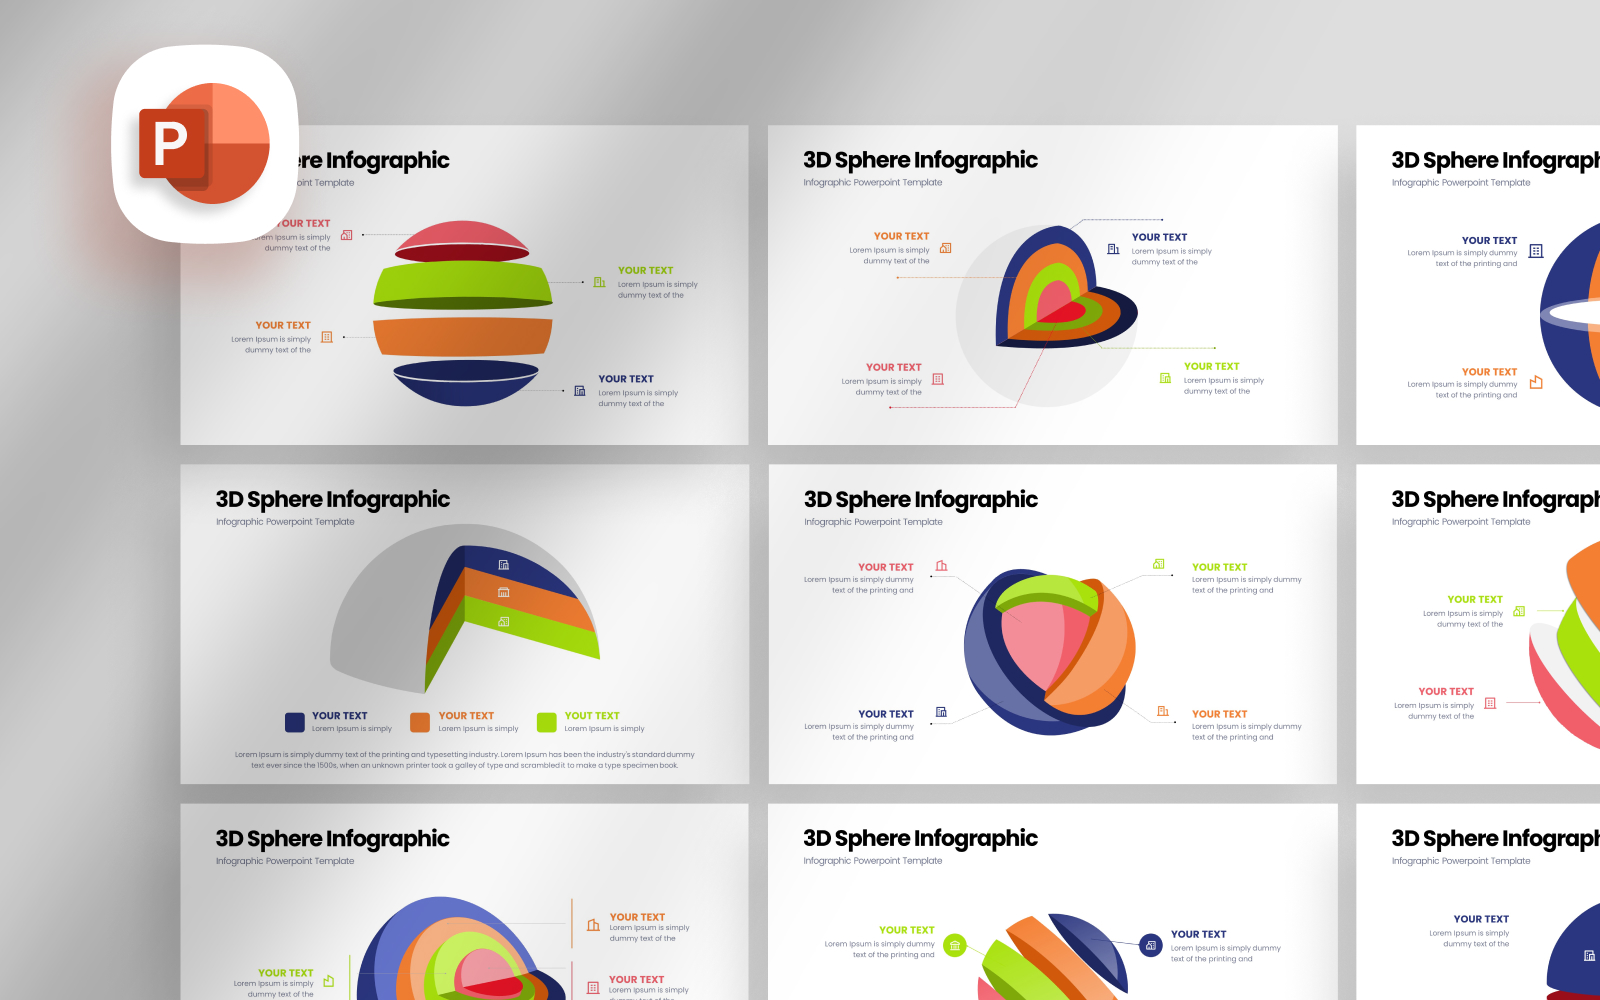 3D Sphere Infographic Presentation Template